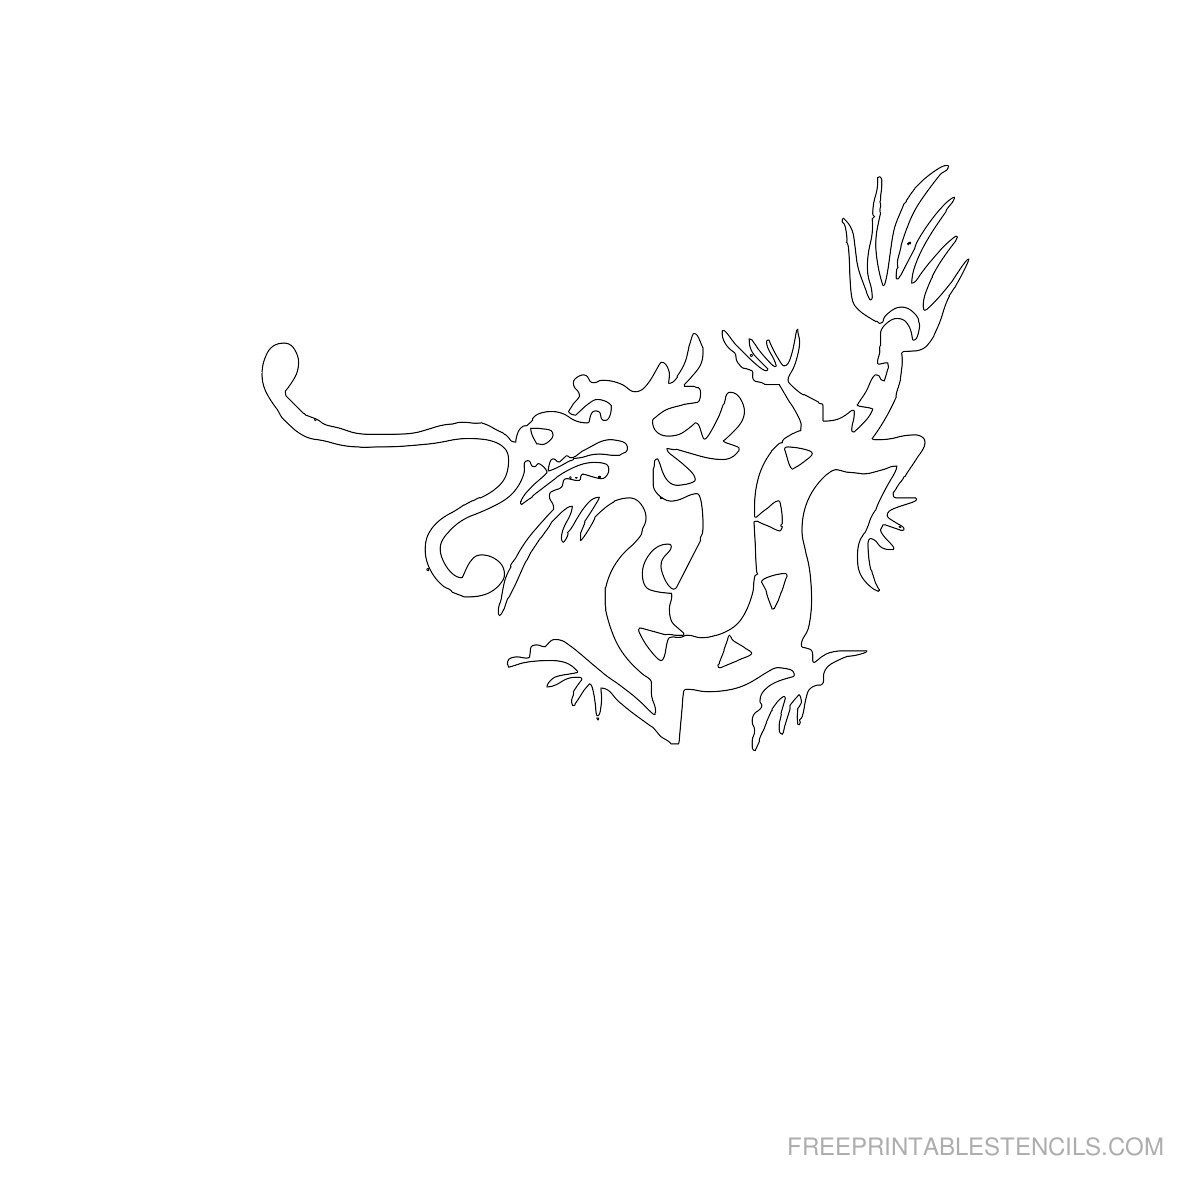 Free Printable Dragon Stencil C | Crafts To Try | Stencils - Free Printable Dragon Stencils